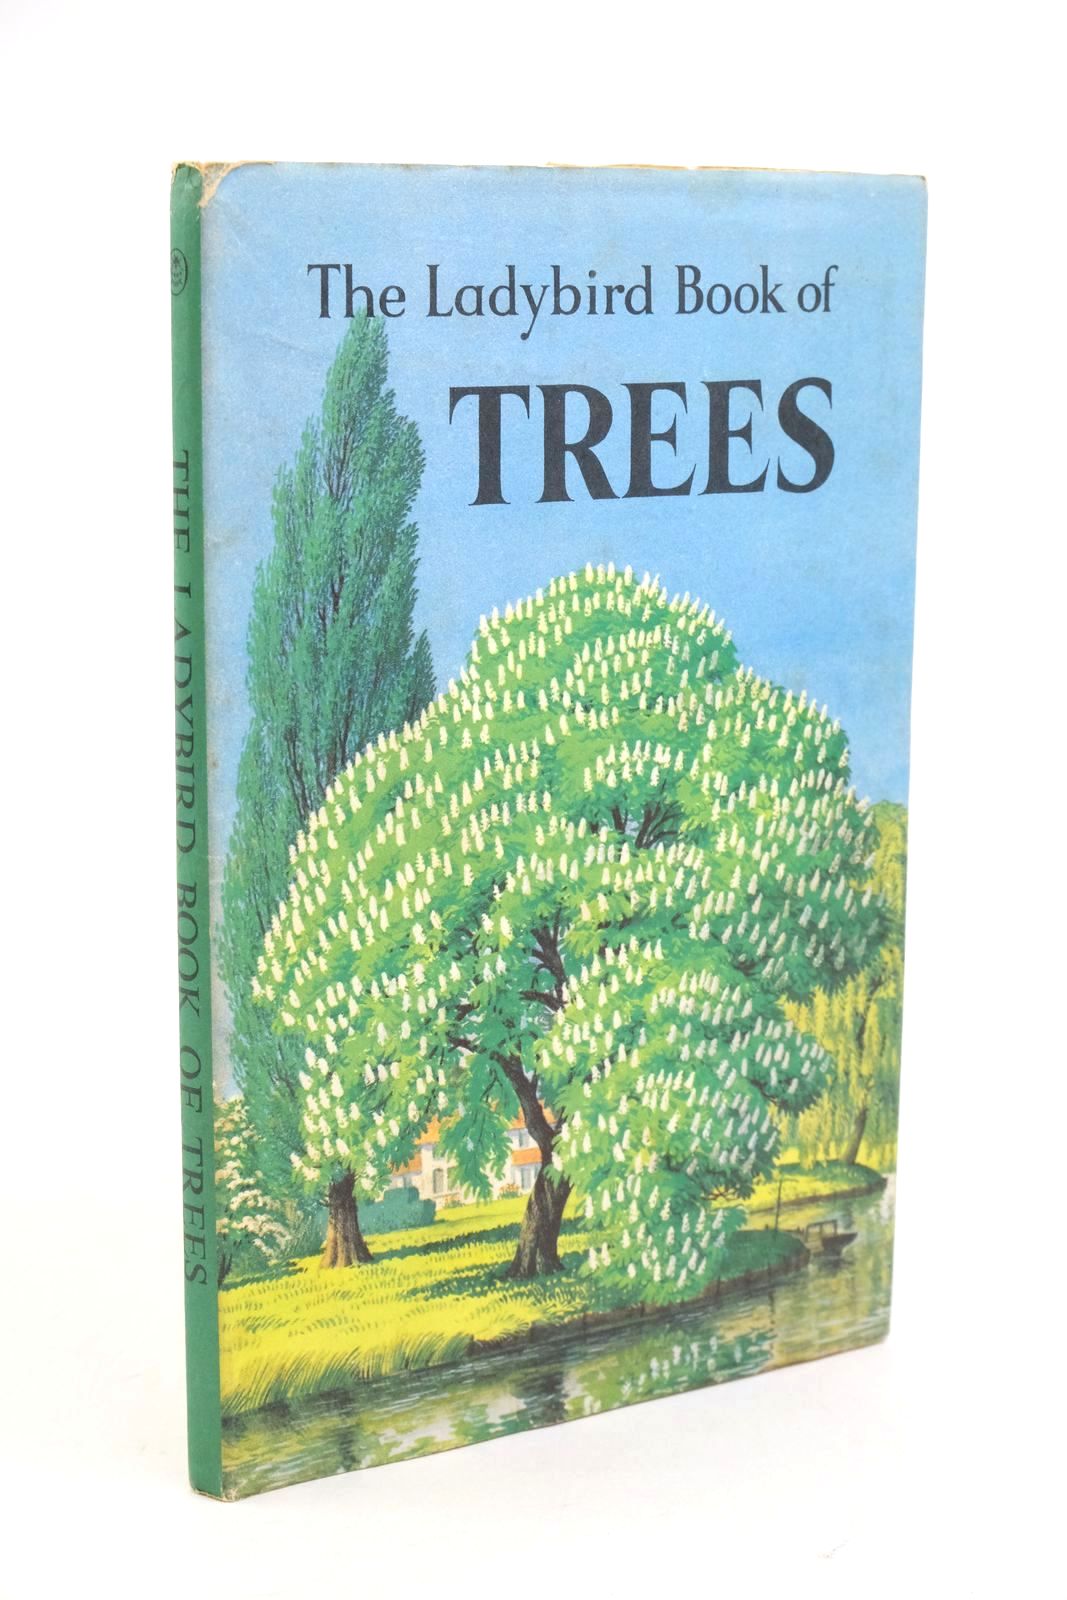 Photo of THE LADYBIRD BOOK OF TREES written by Vesey-Fitzgerald, Brian illustrated by Badmin, S.R. published by Wills & Hepworth Ltd. (STOCK CODE: 1322137)  for sale by Stella & Rose's Books